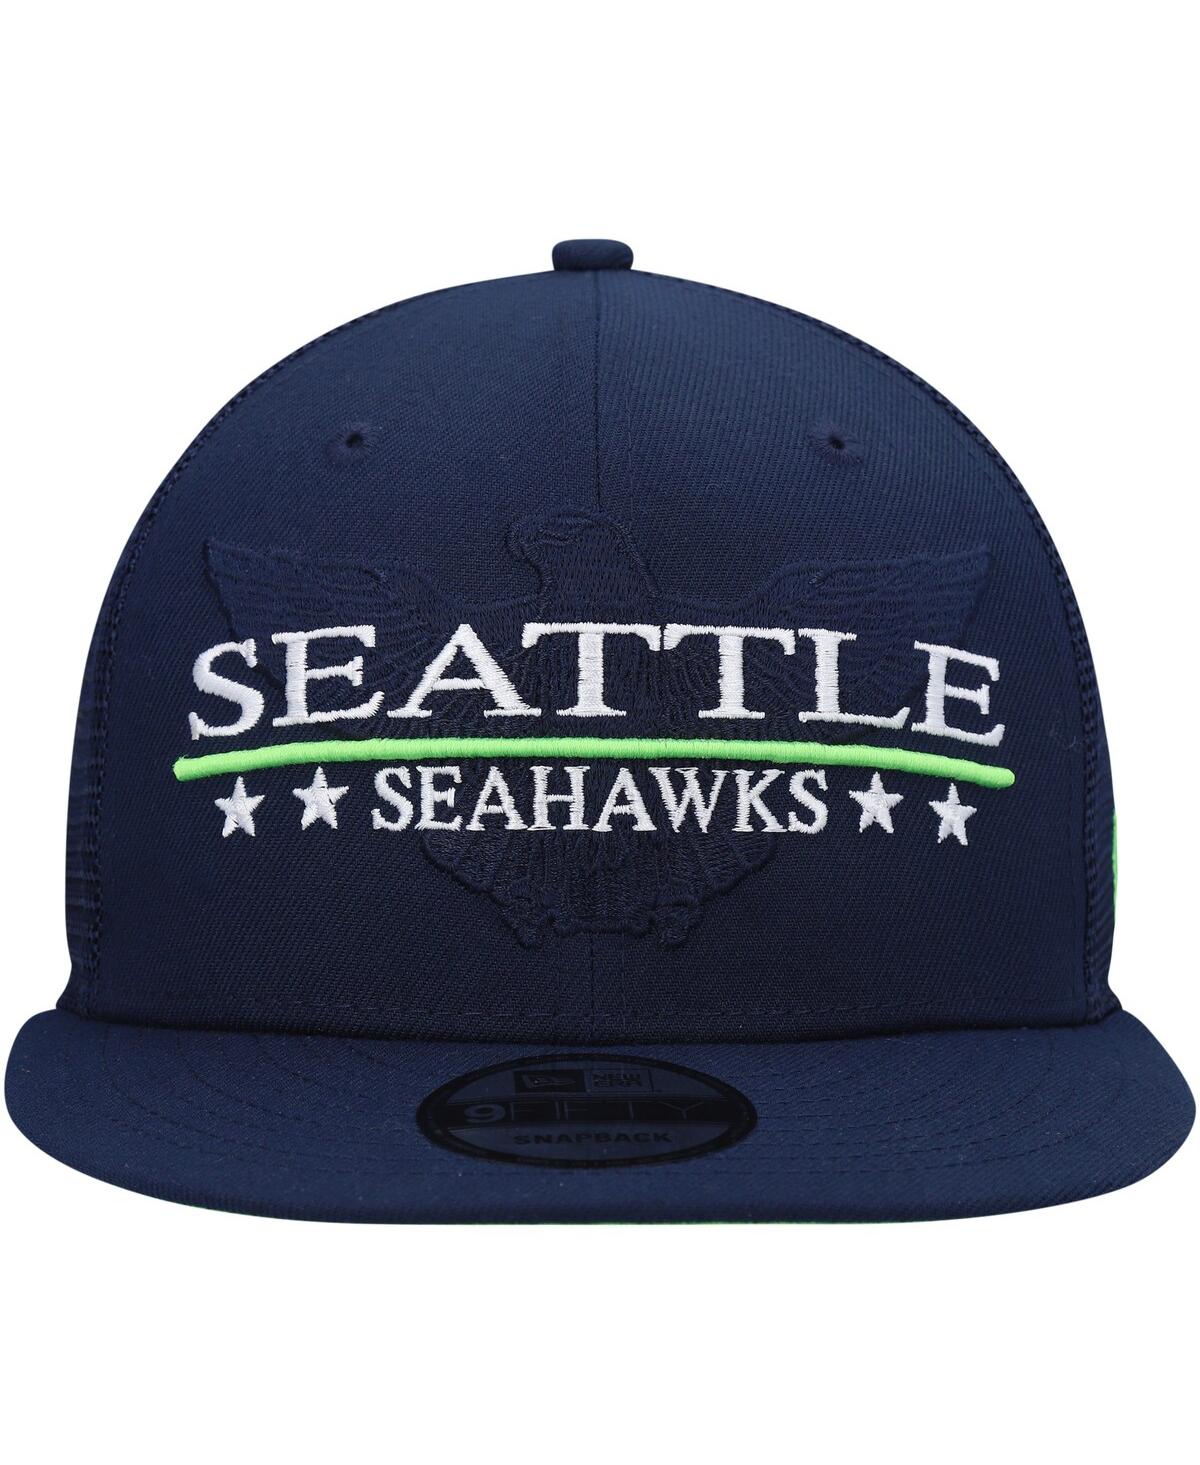 Men's New Era College Navy Seattle Seahawks A-Frame 9FIFTY